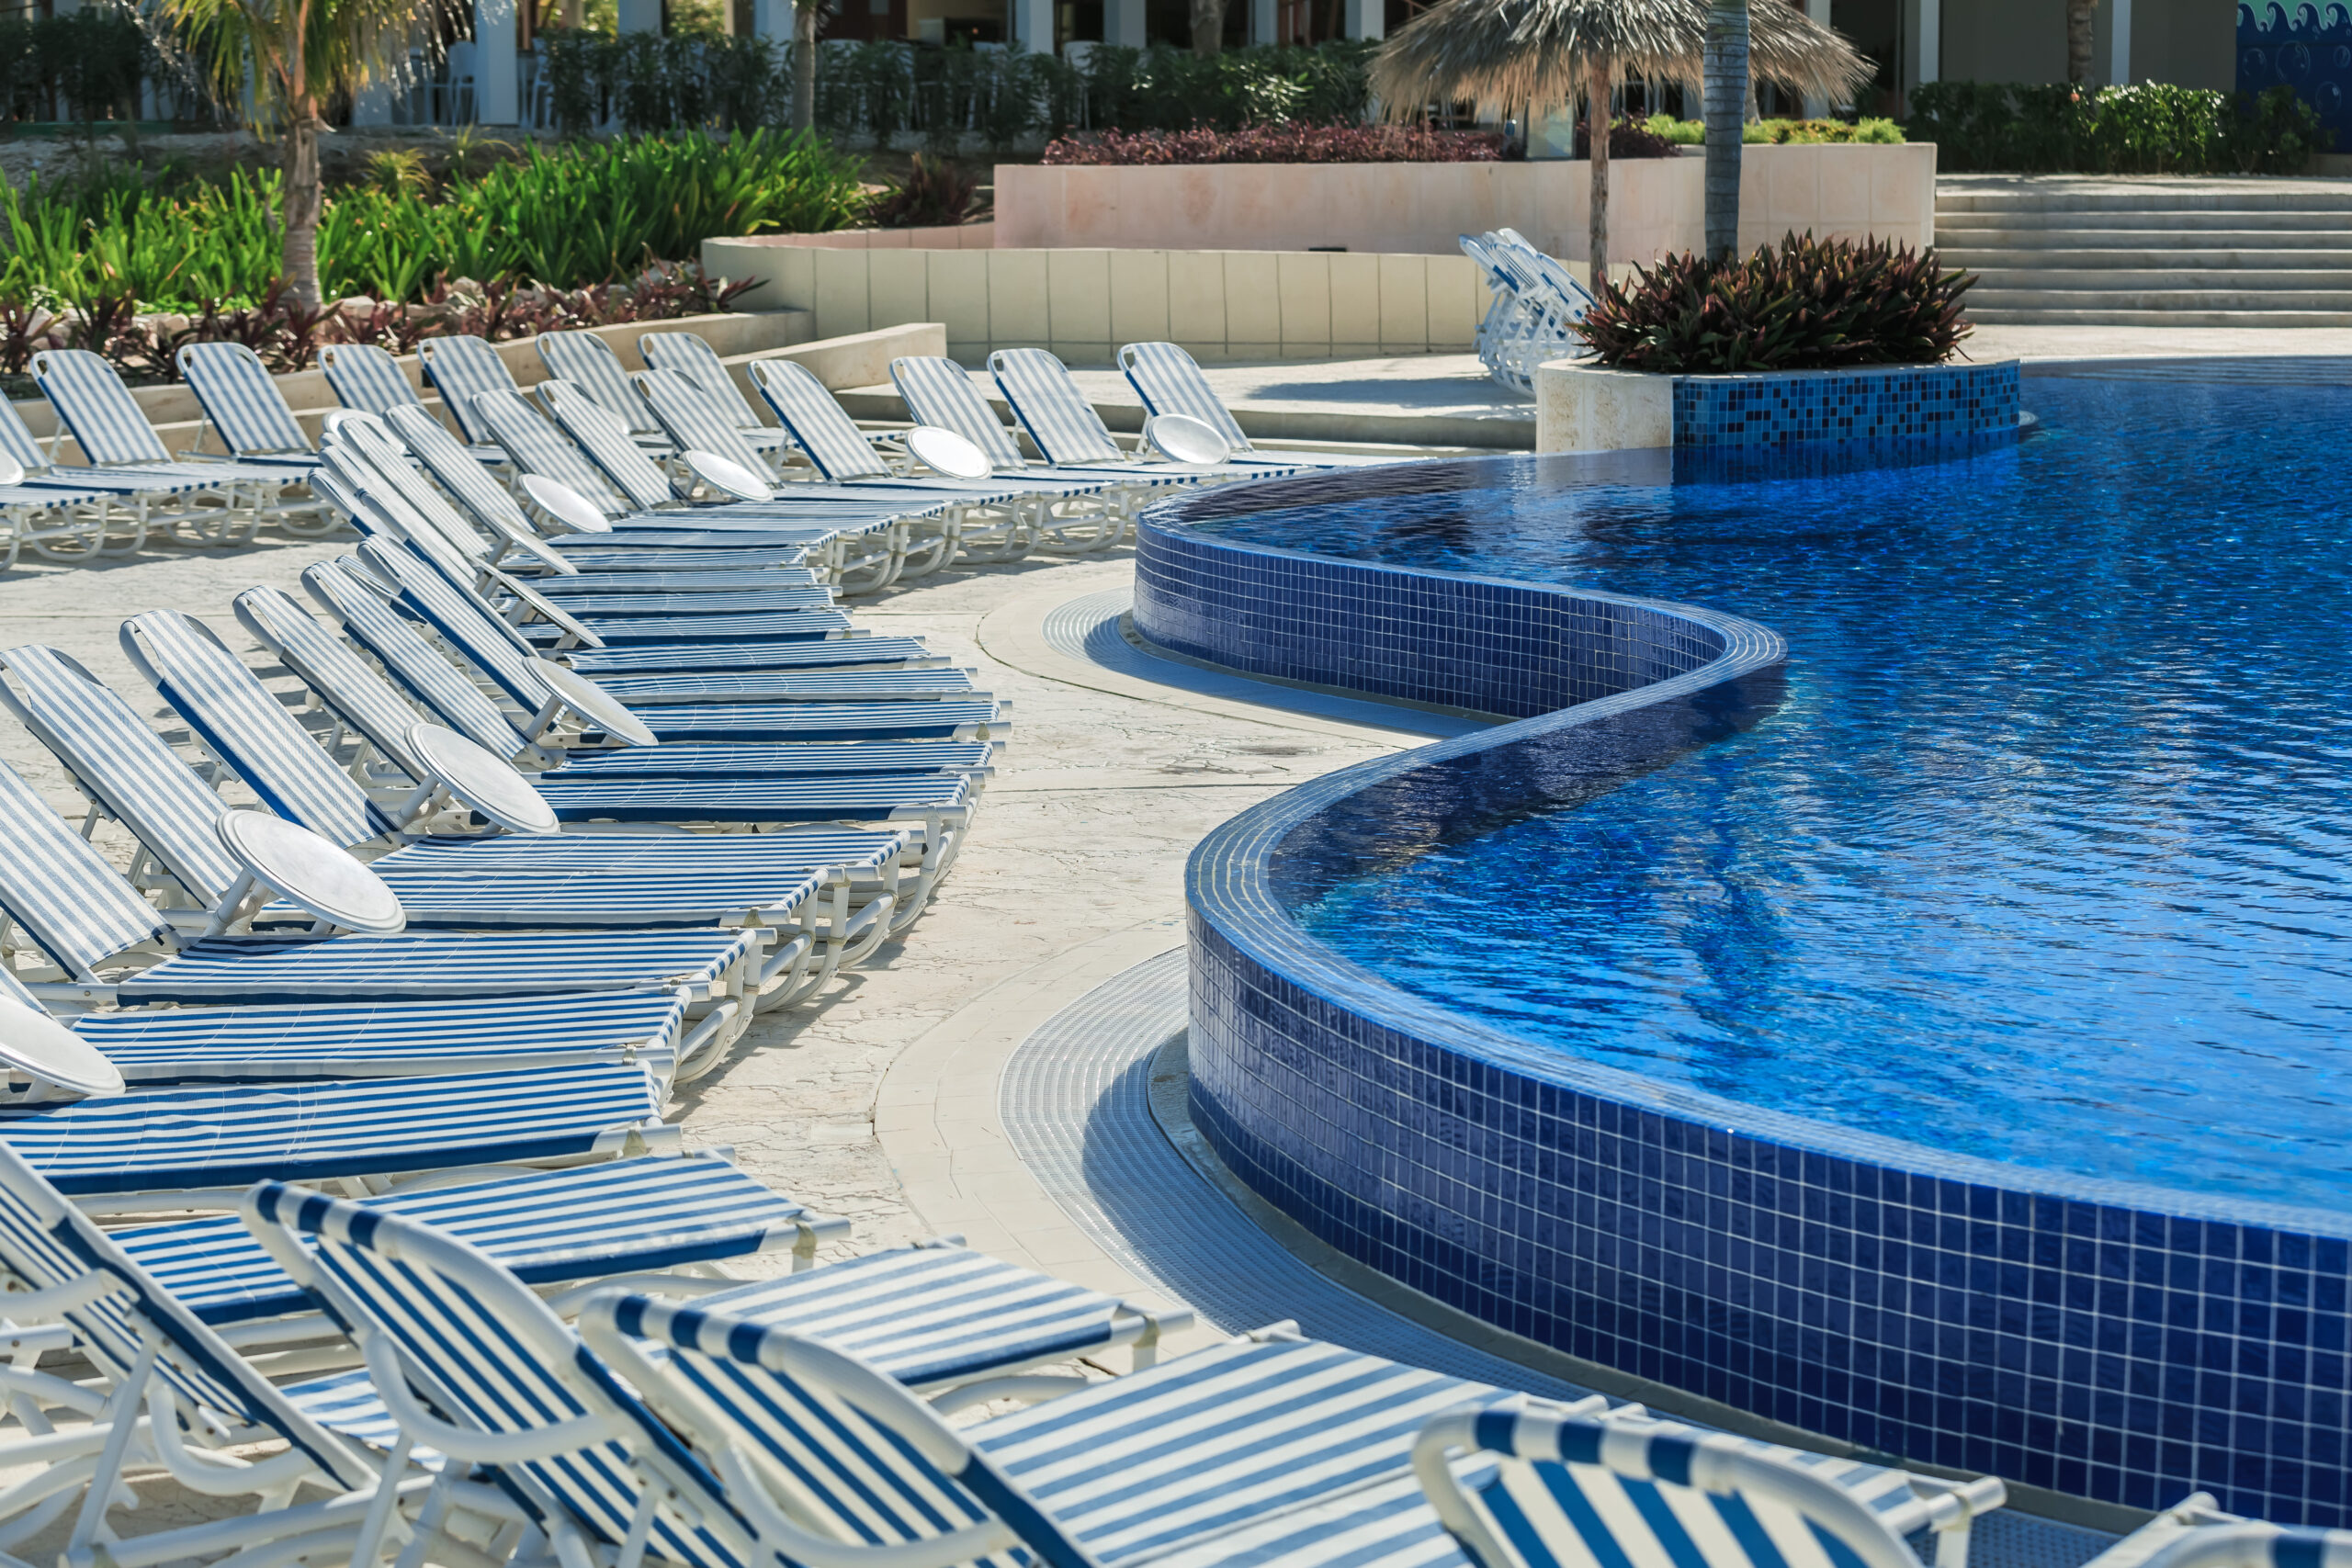 Poolside chairs arranged beside glistening pool tiles, creating an inviting space for relaxation.